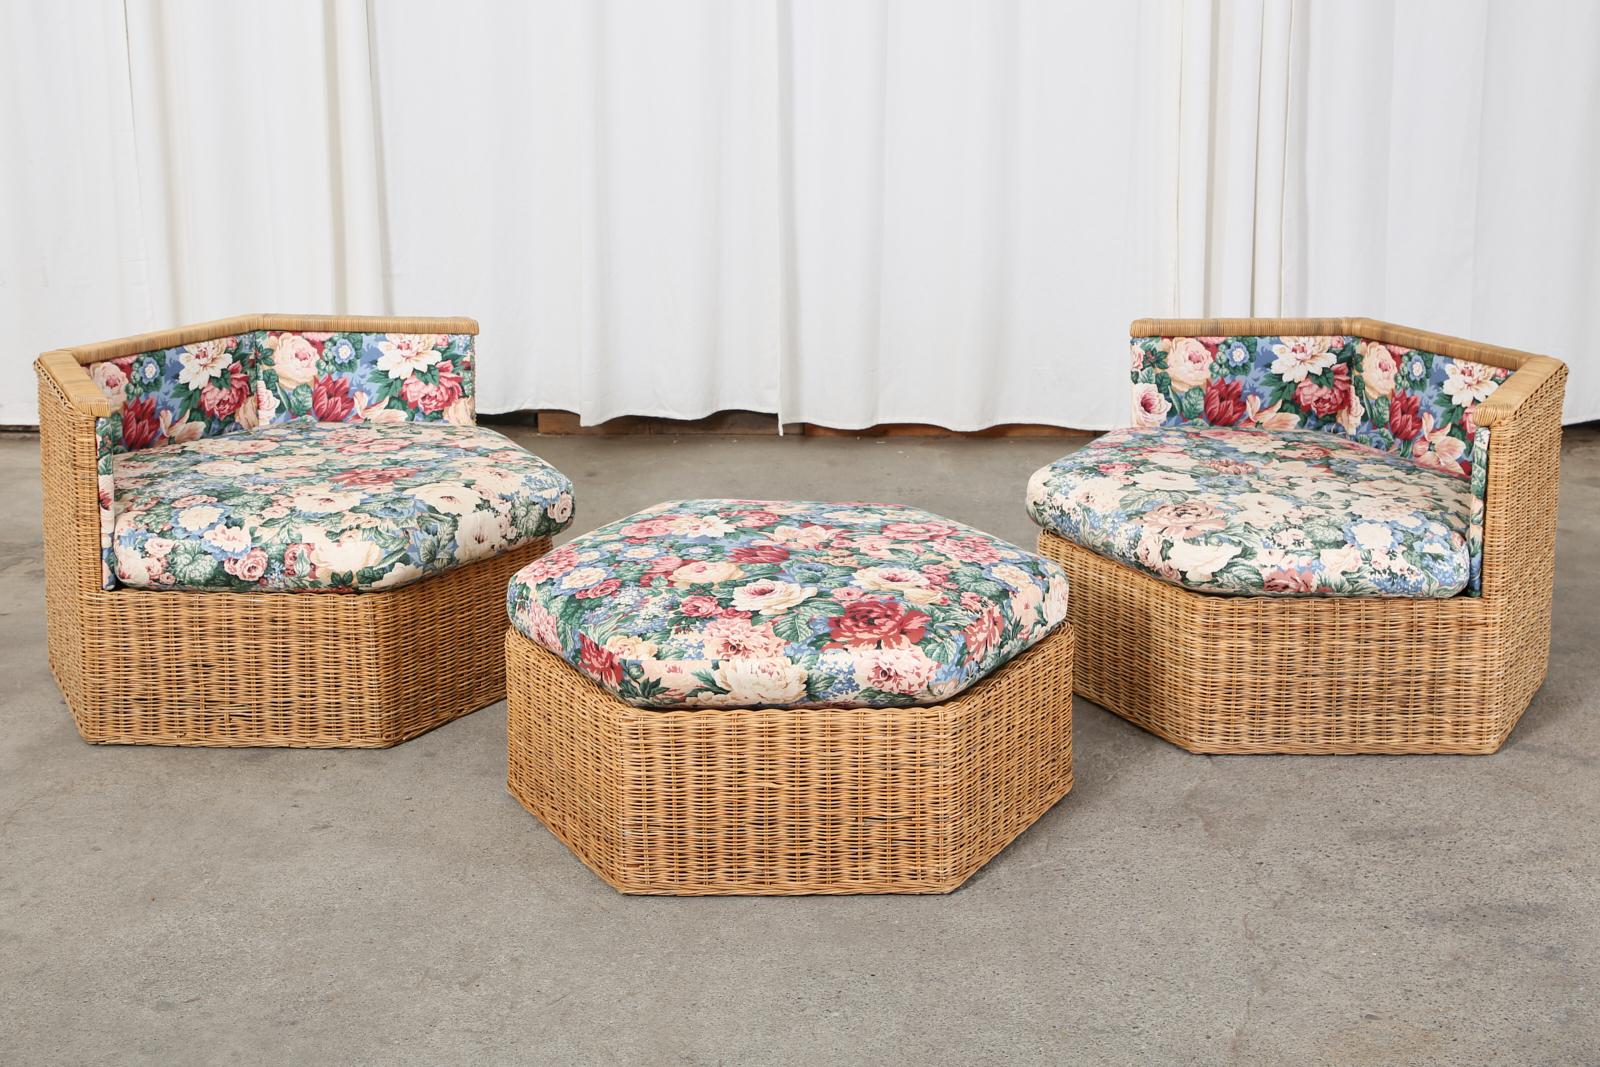 Stylish organic modern modular seating sofa set or suite consisting of two hexagonal shaped lounge chairs and a conforming ottoman. Constructed from wood frames covered with woven rattan wicker. Topped with loose seat cushions and padded upholstery